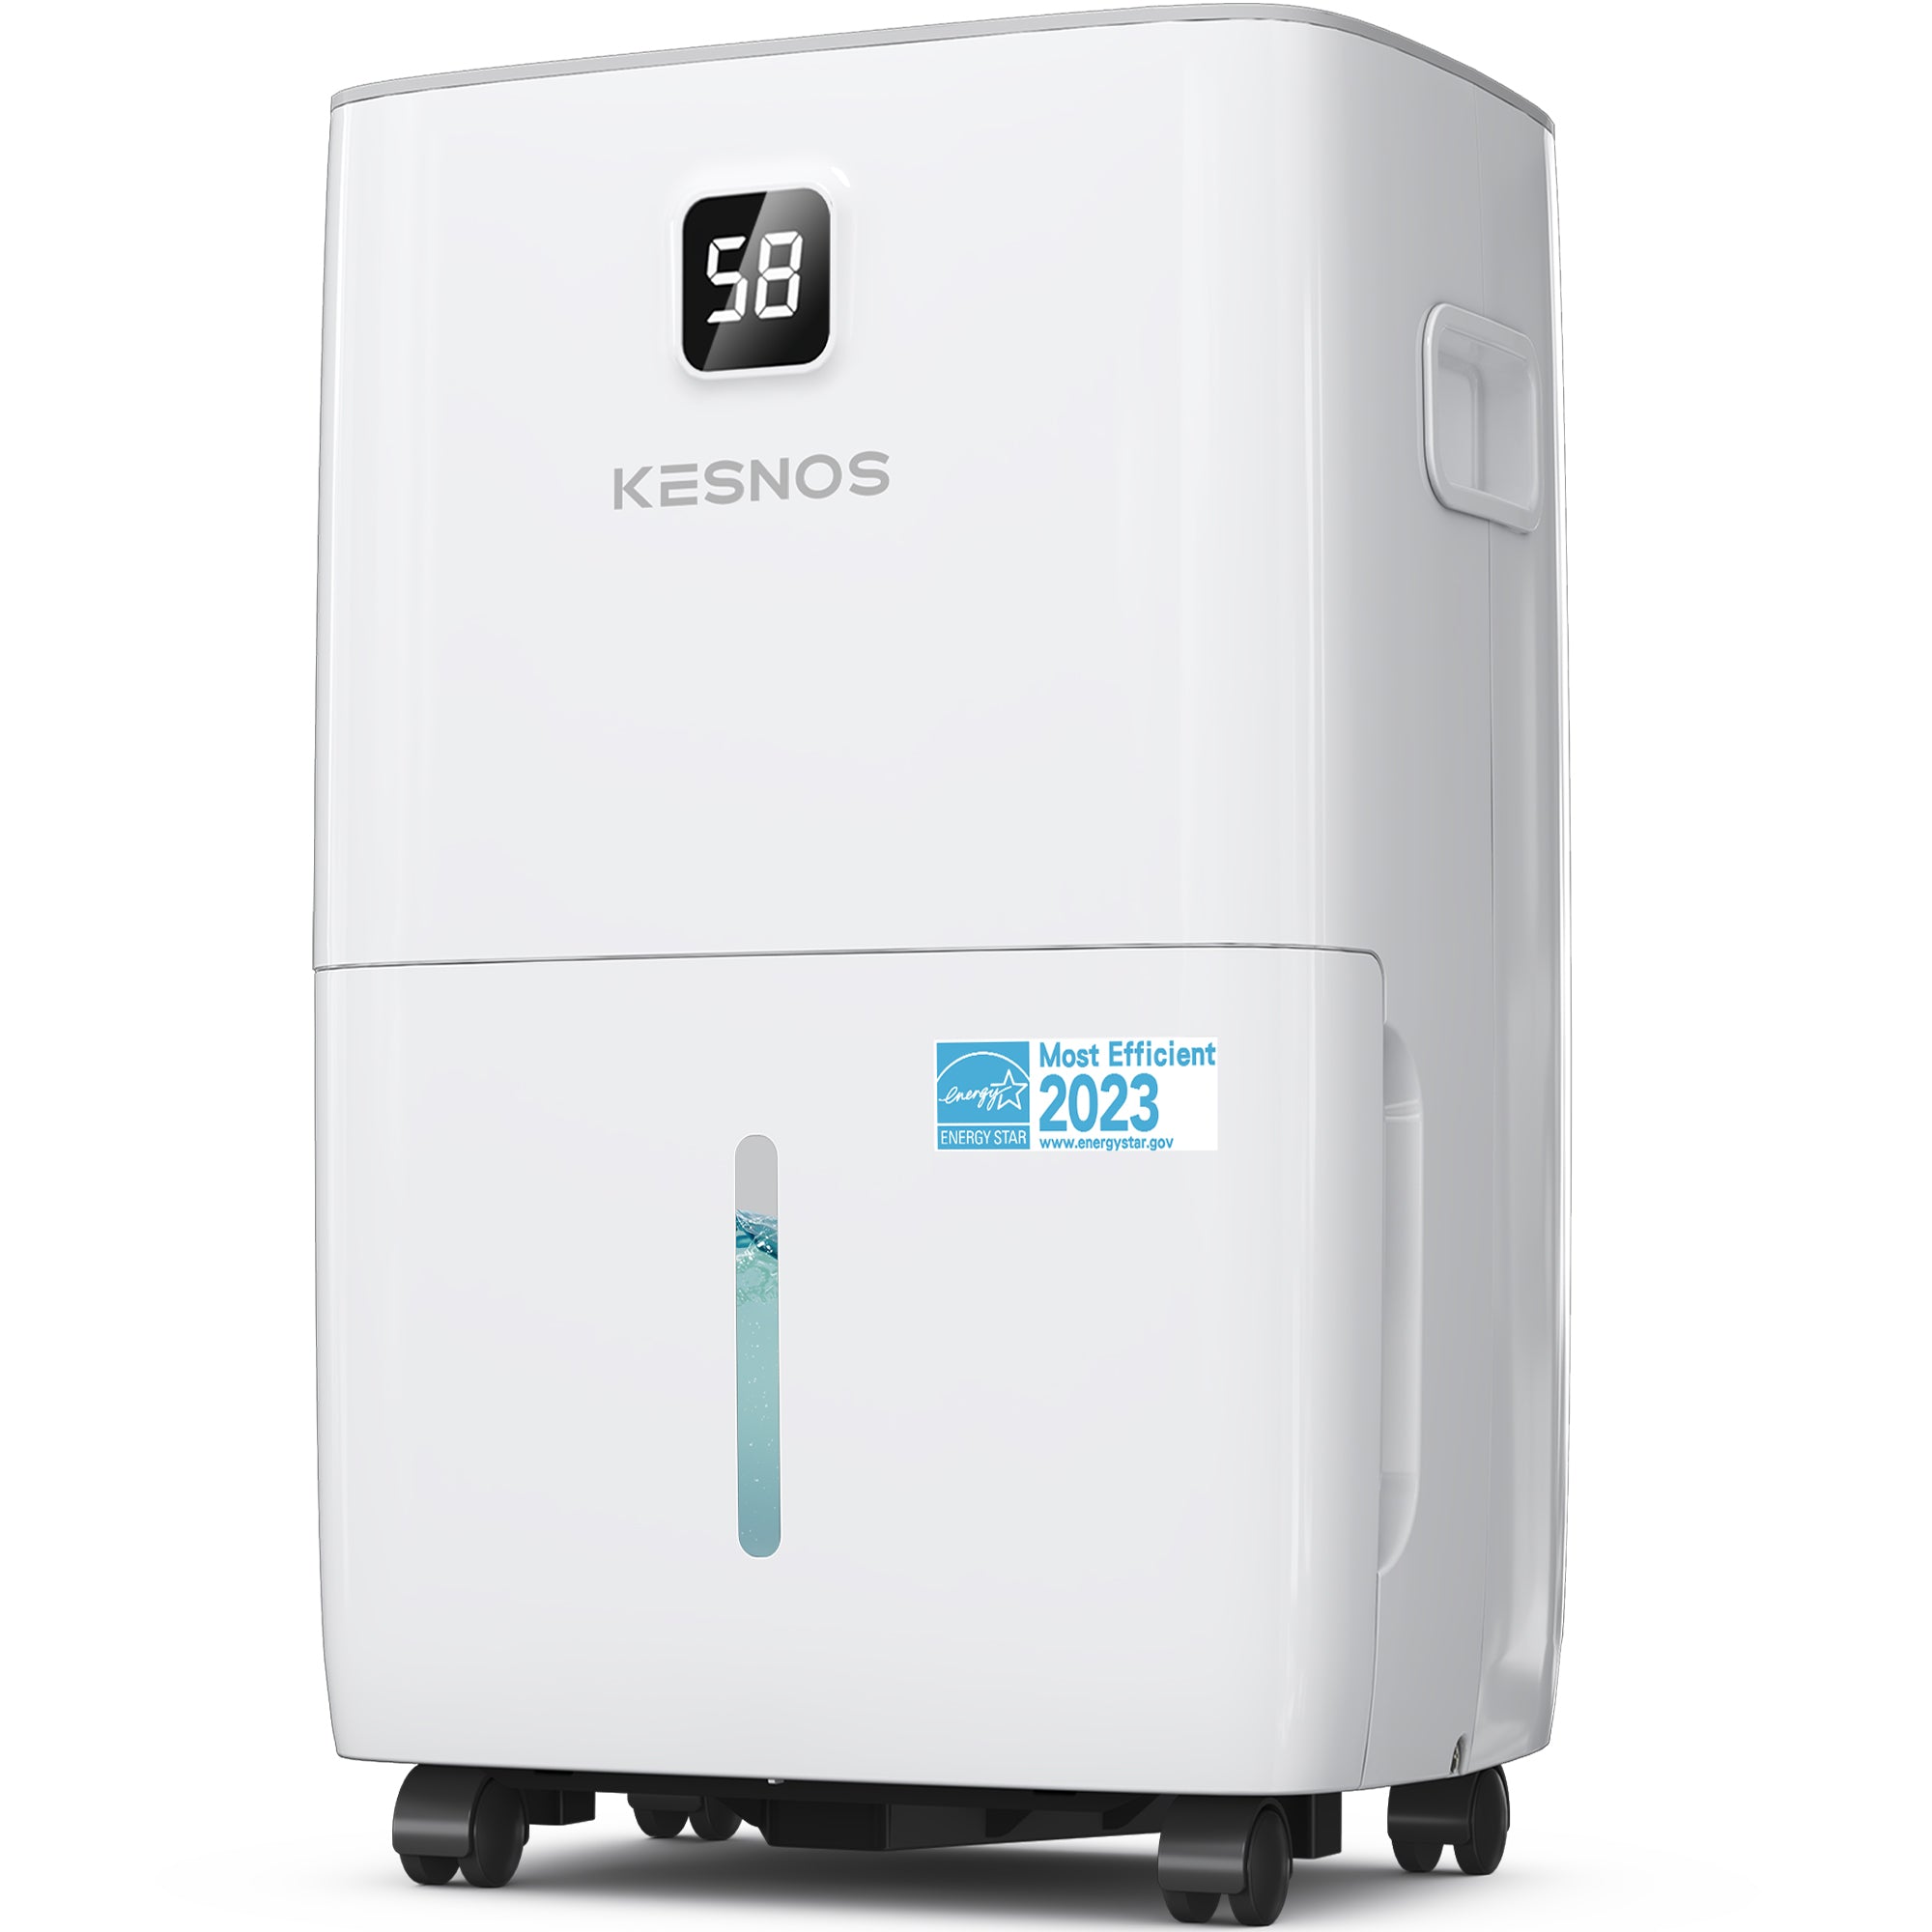 Kesnos 120 Pints Home Dehumidifier  Energy Star Most Efficient 2023 for Space Up to 6500 Sq. Ft - Dehumidifier with Drain Hose for Basement, Bathroom - Dehumidifier with Front Display (Model: JD025N-120)